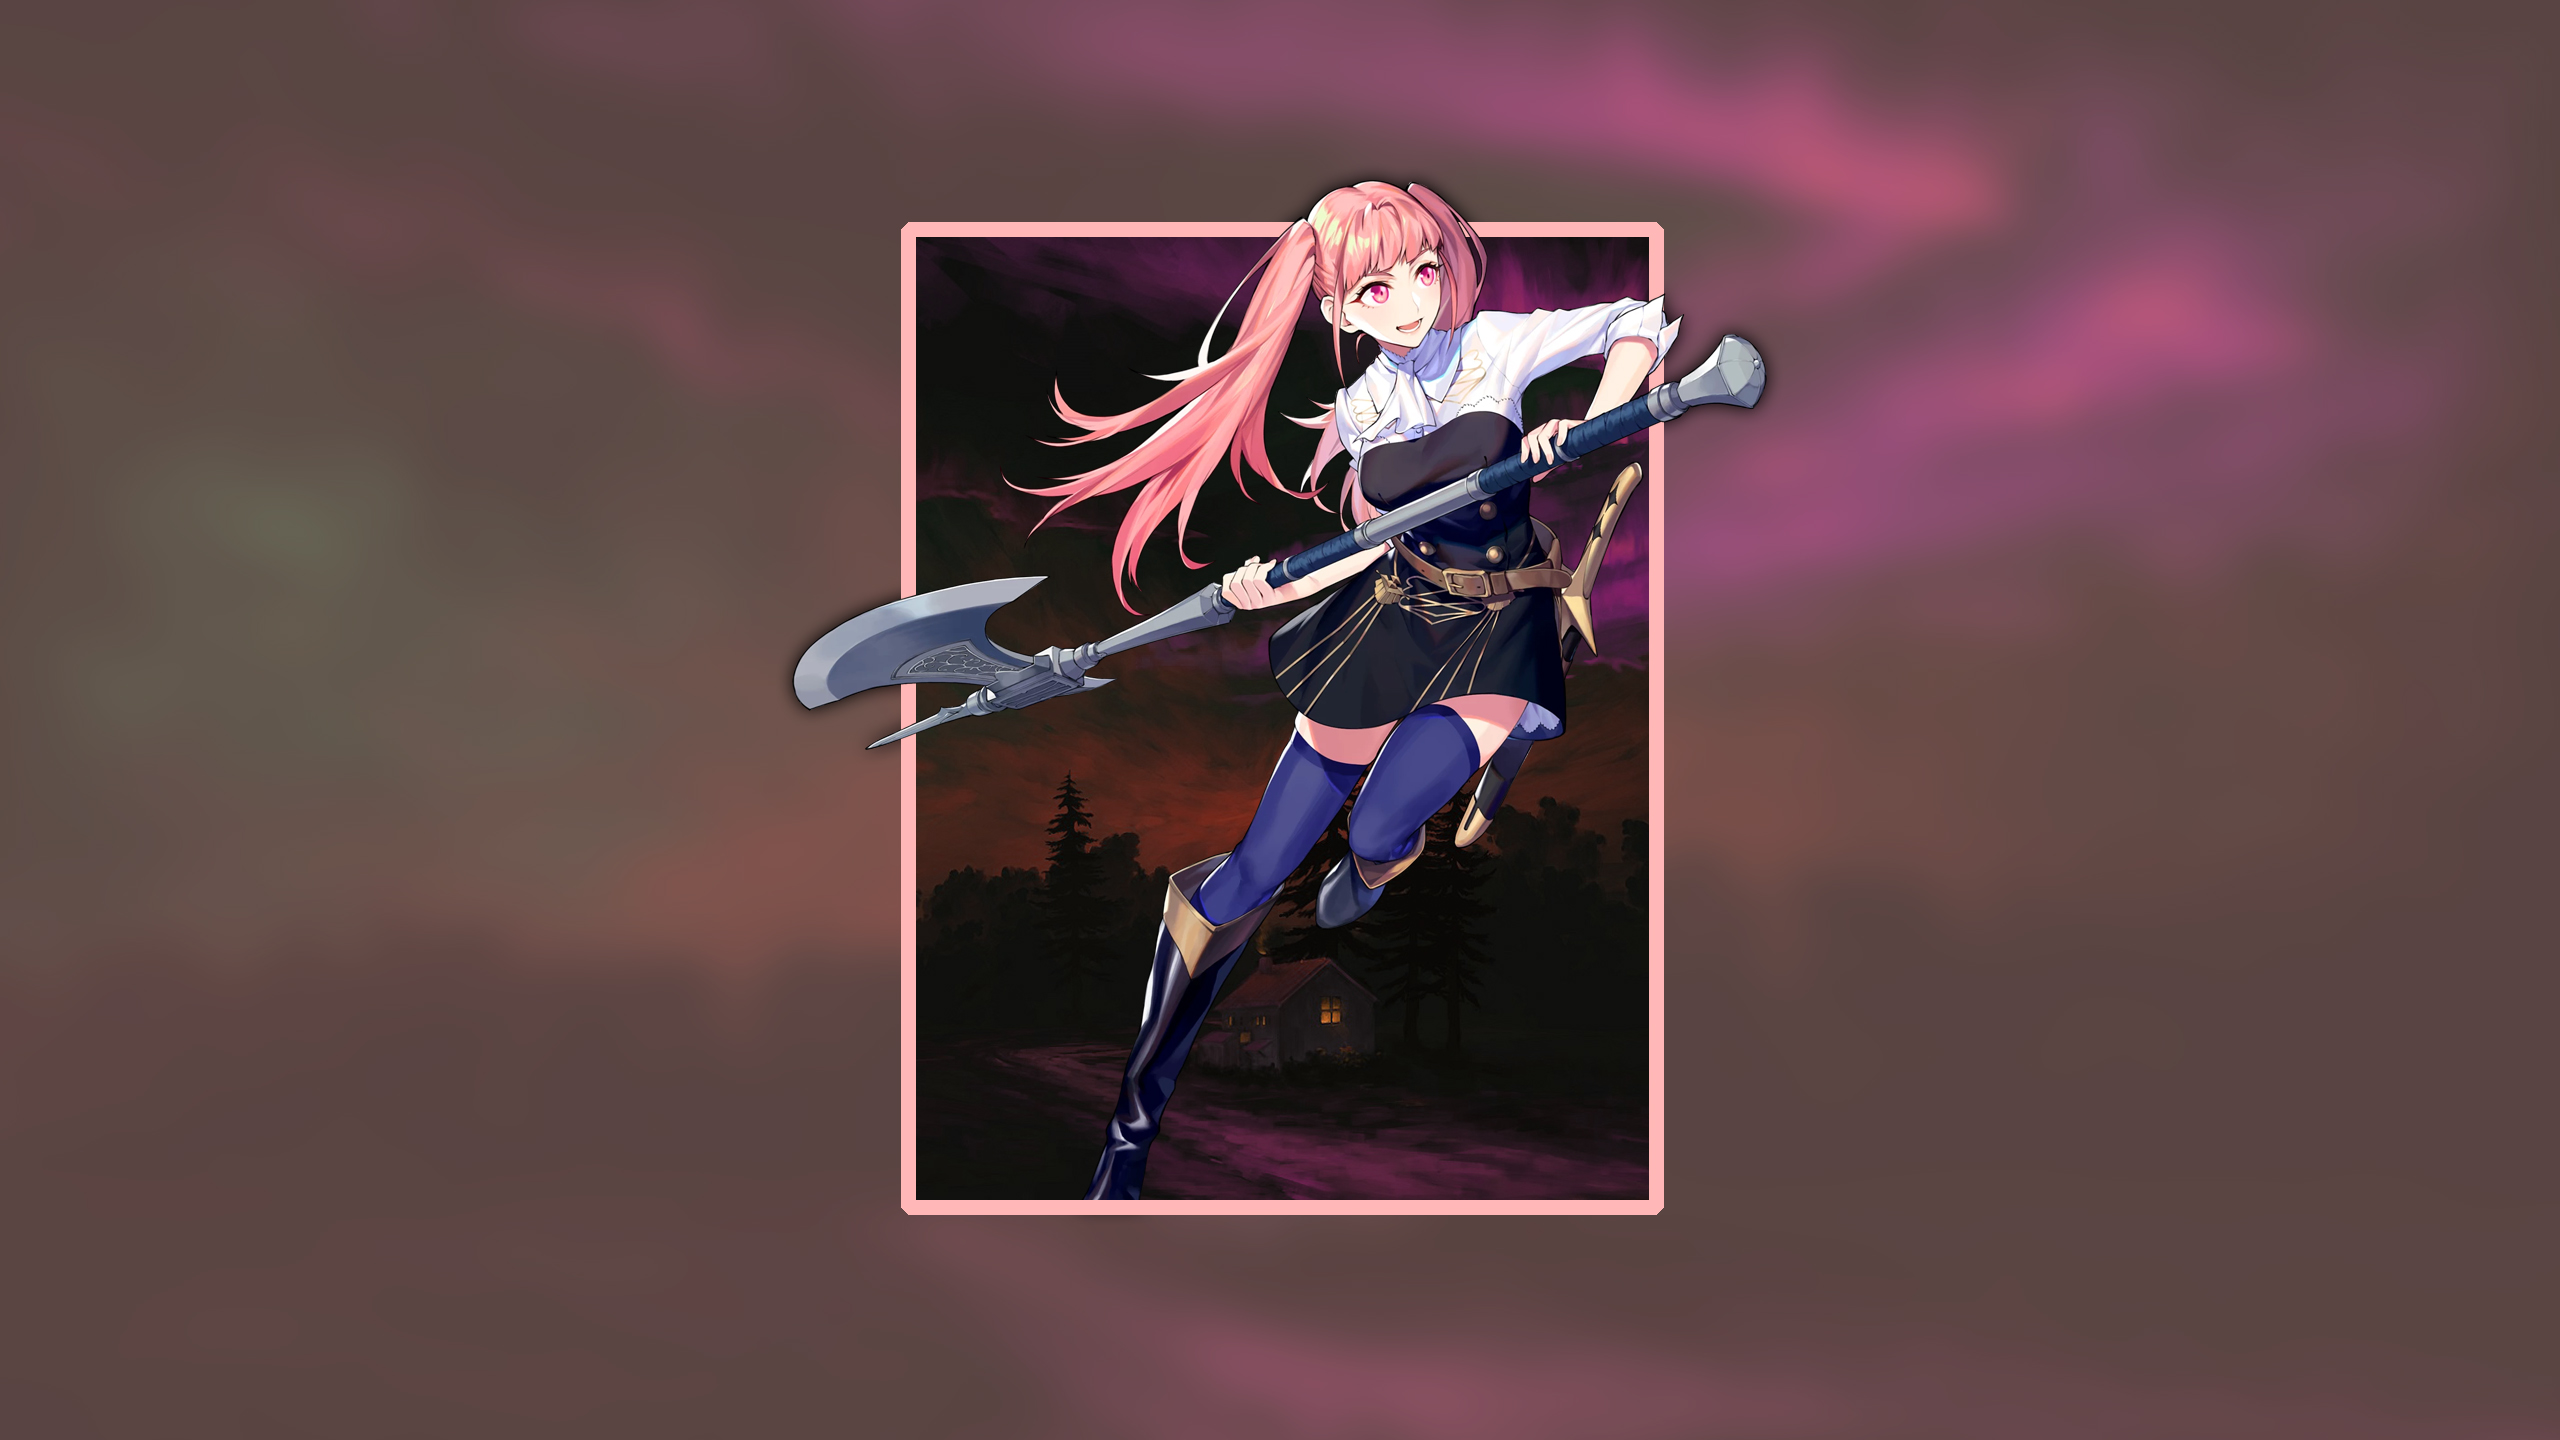 Anime 2560x1440 anime picture-in-picture pink hair anime girls battle axe